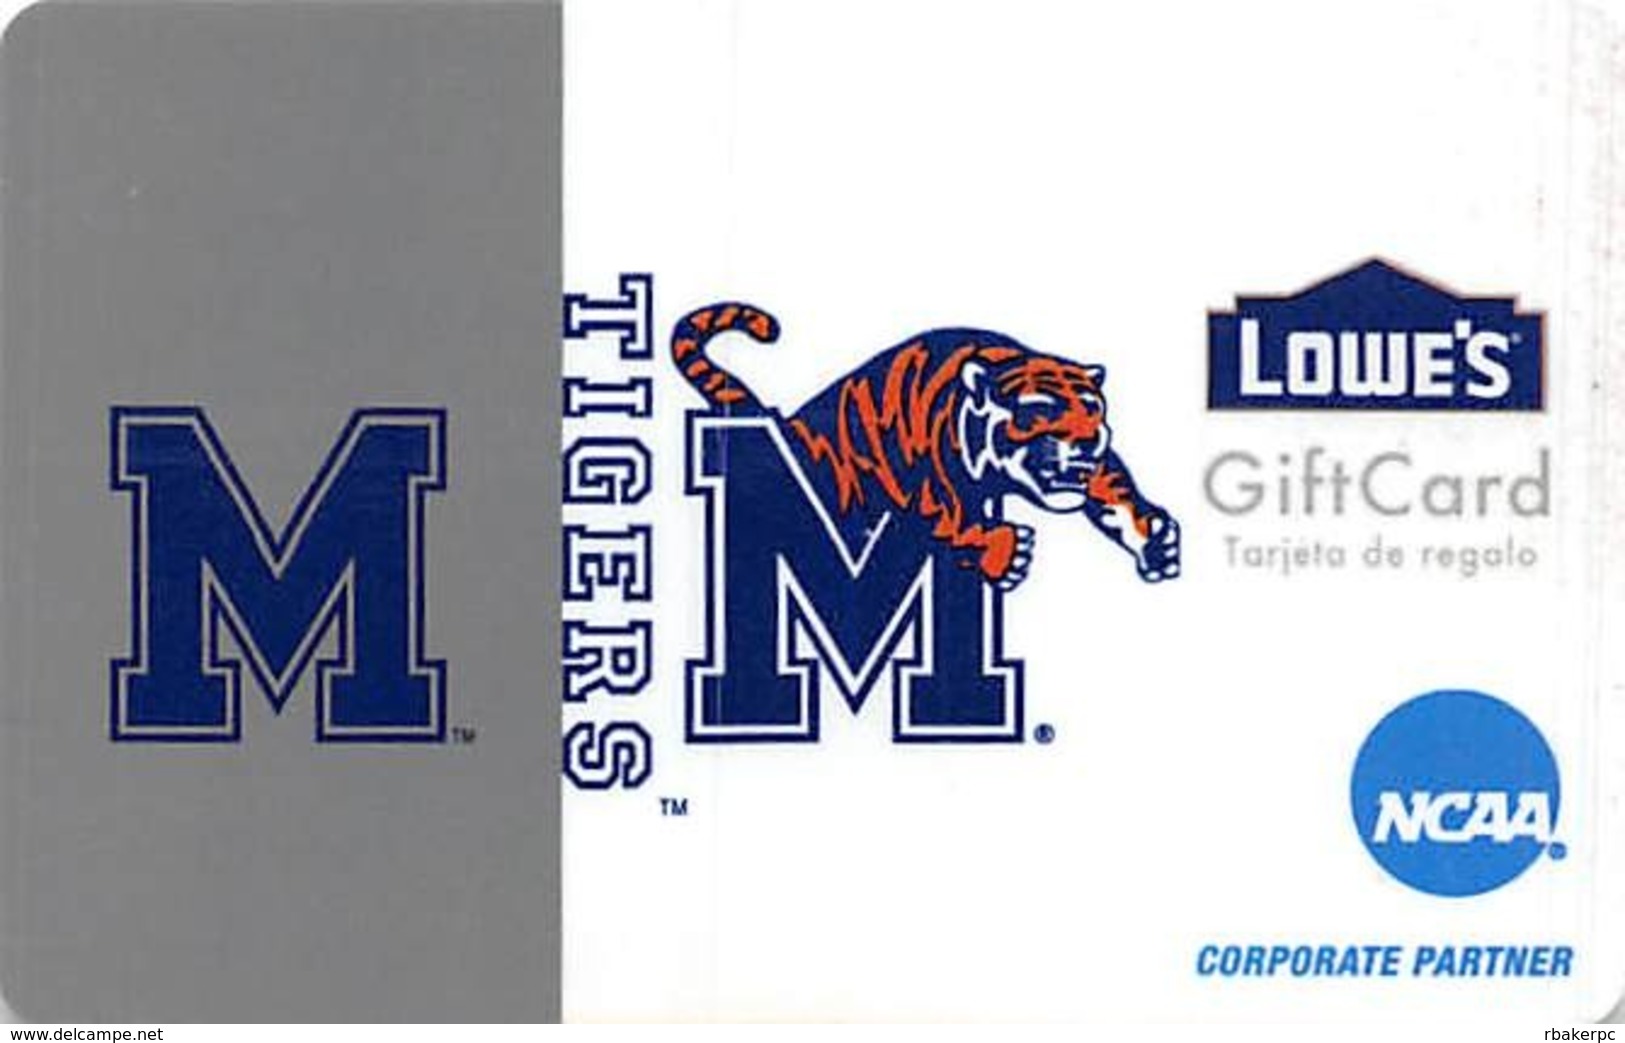 Lowes NCAA Gift Card - Tigers - Gift Cards